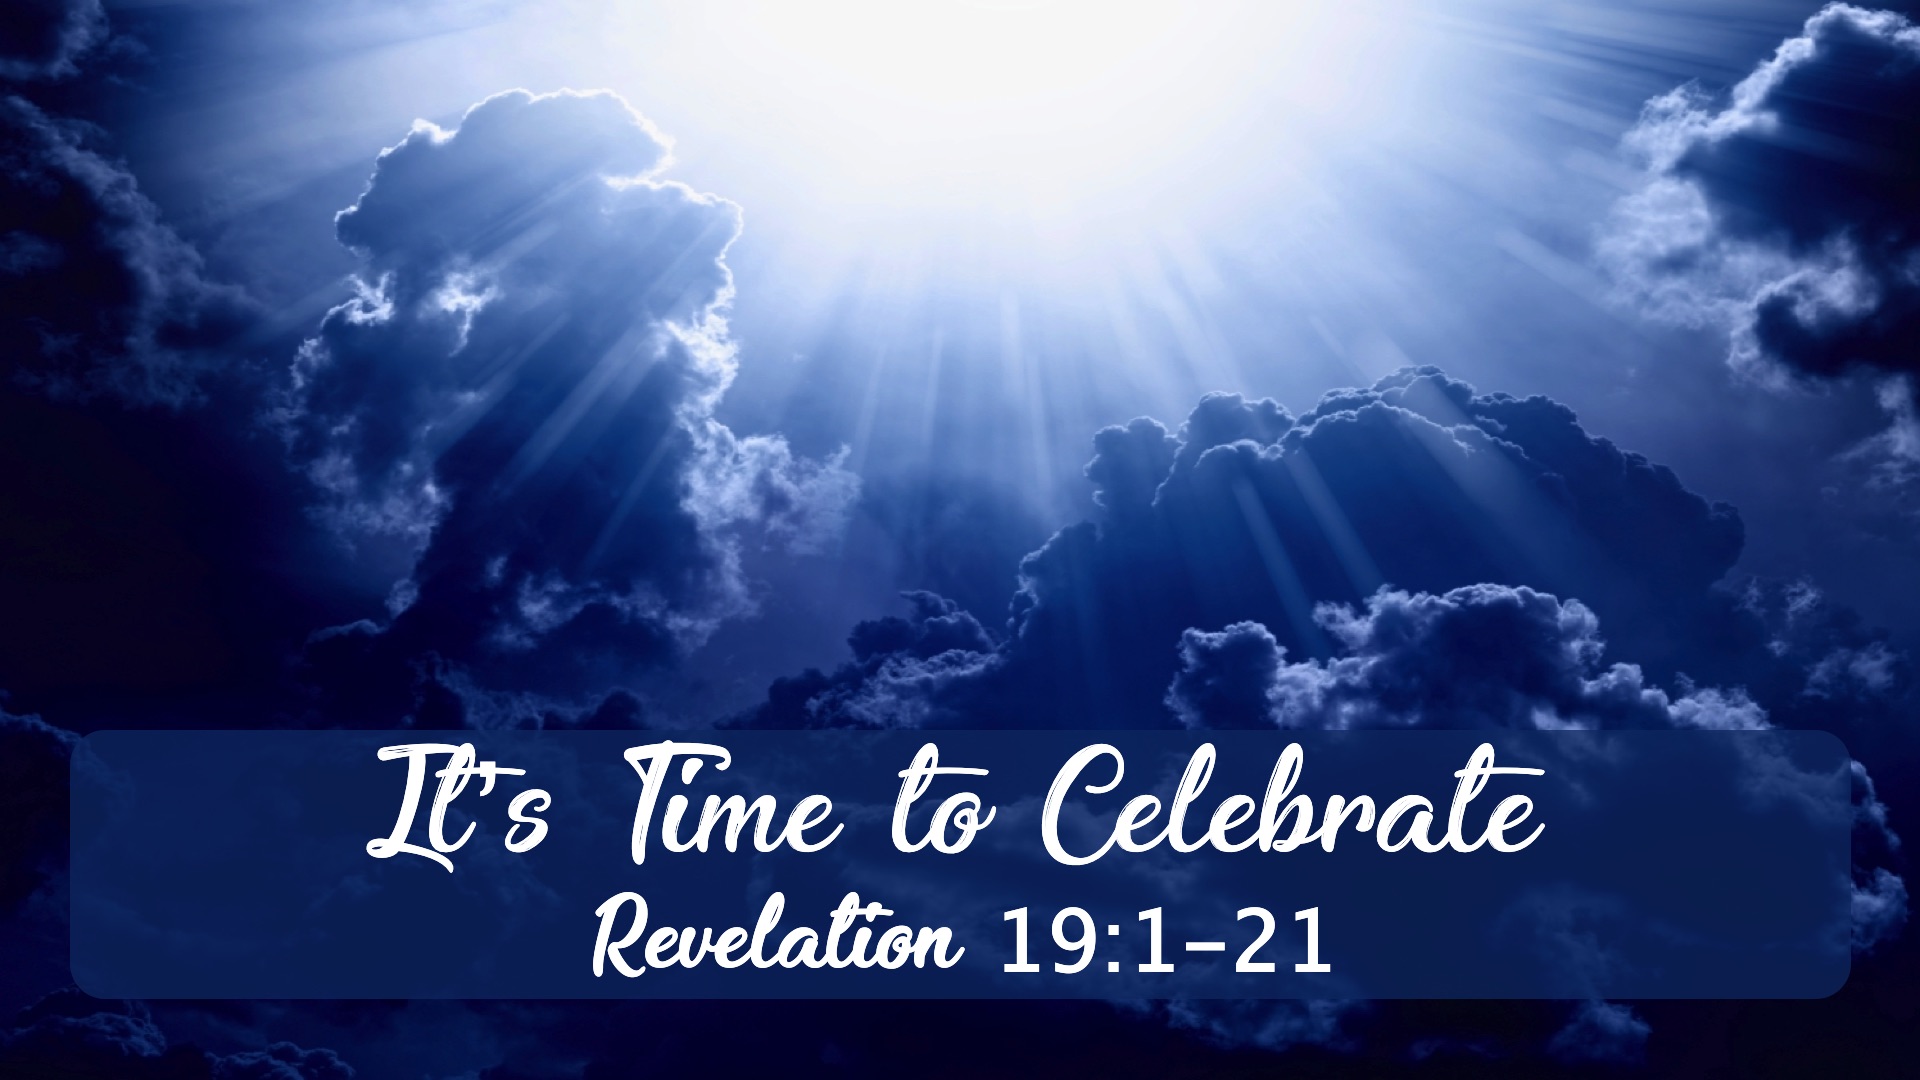 “The Book of Revelation: It’s Time to Celebrate!”